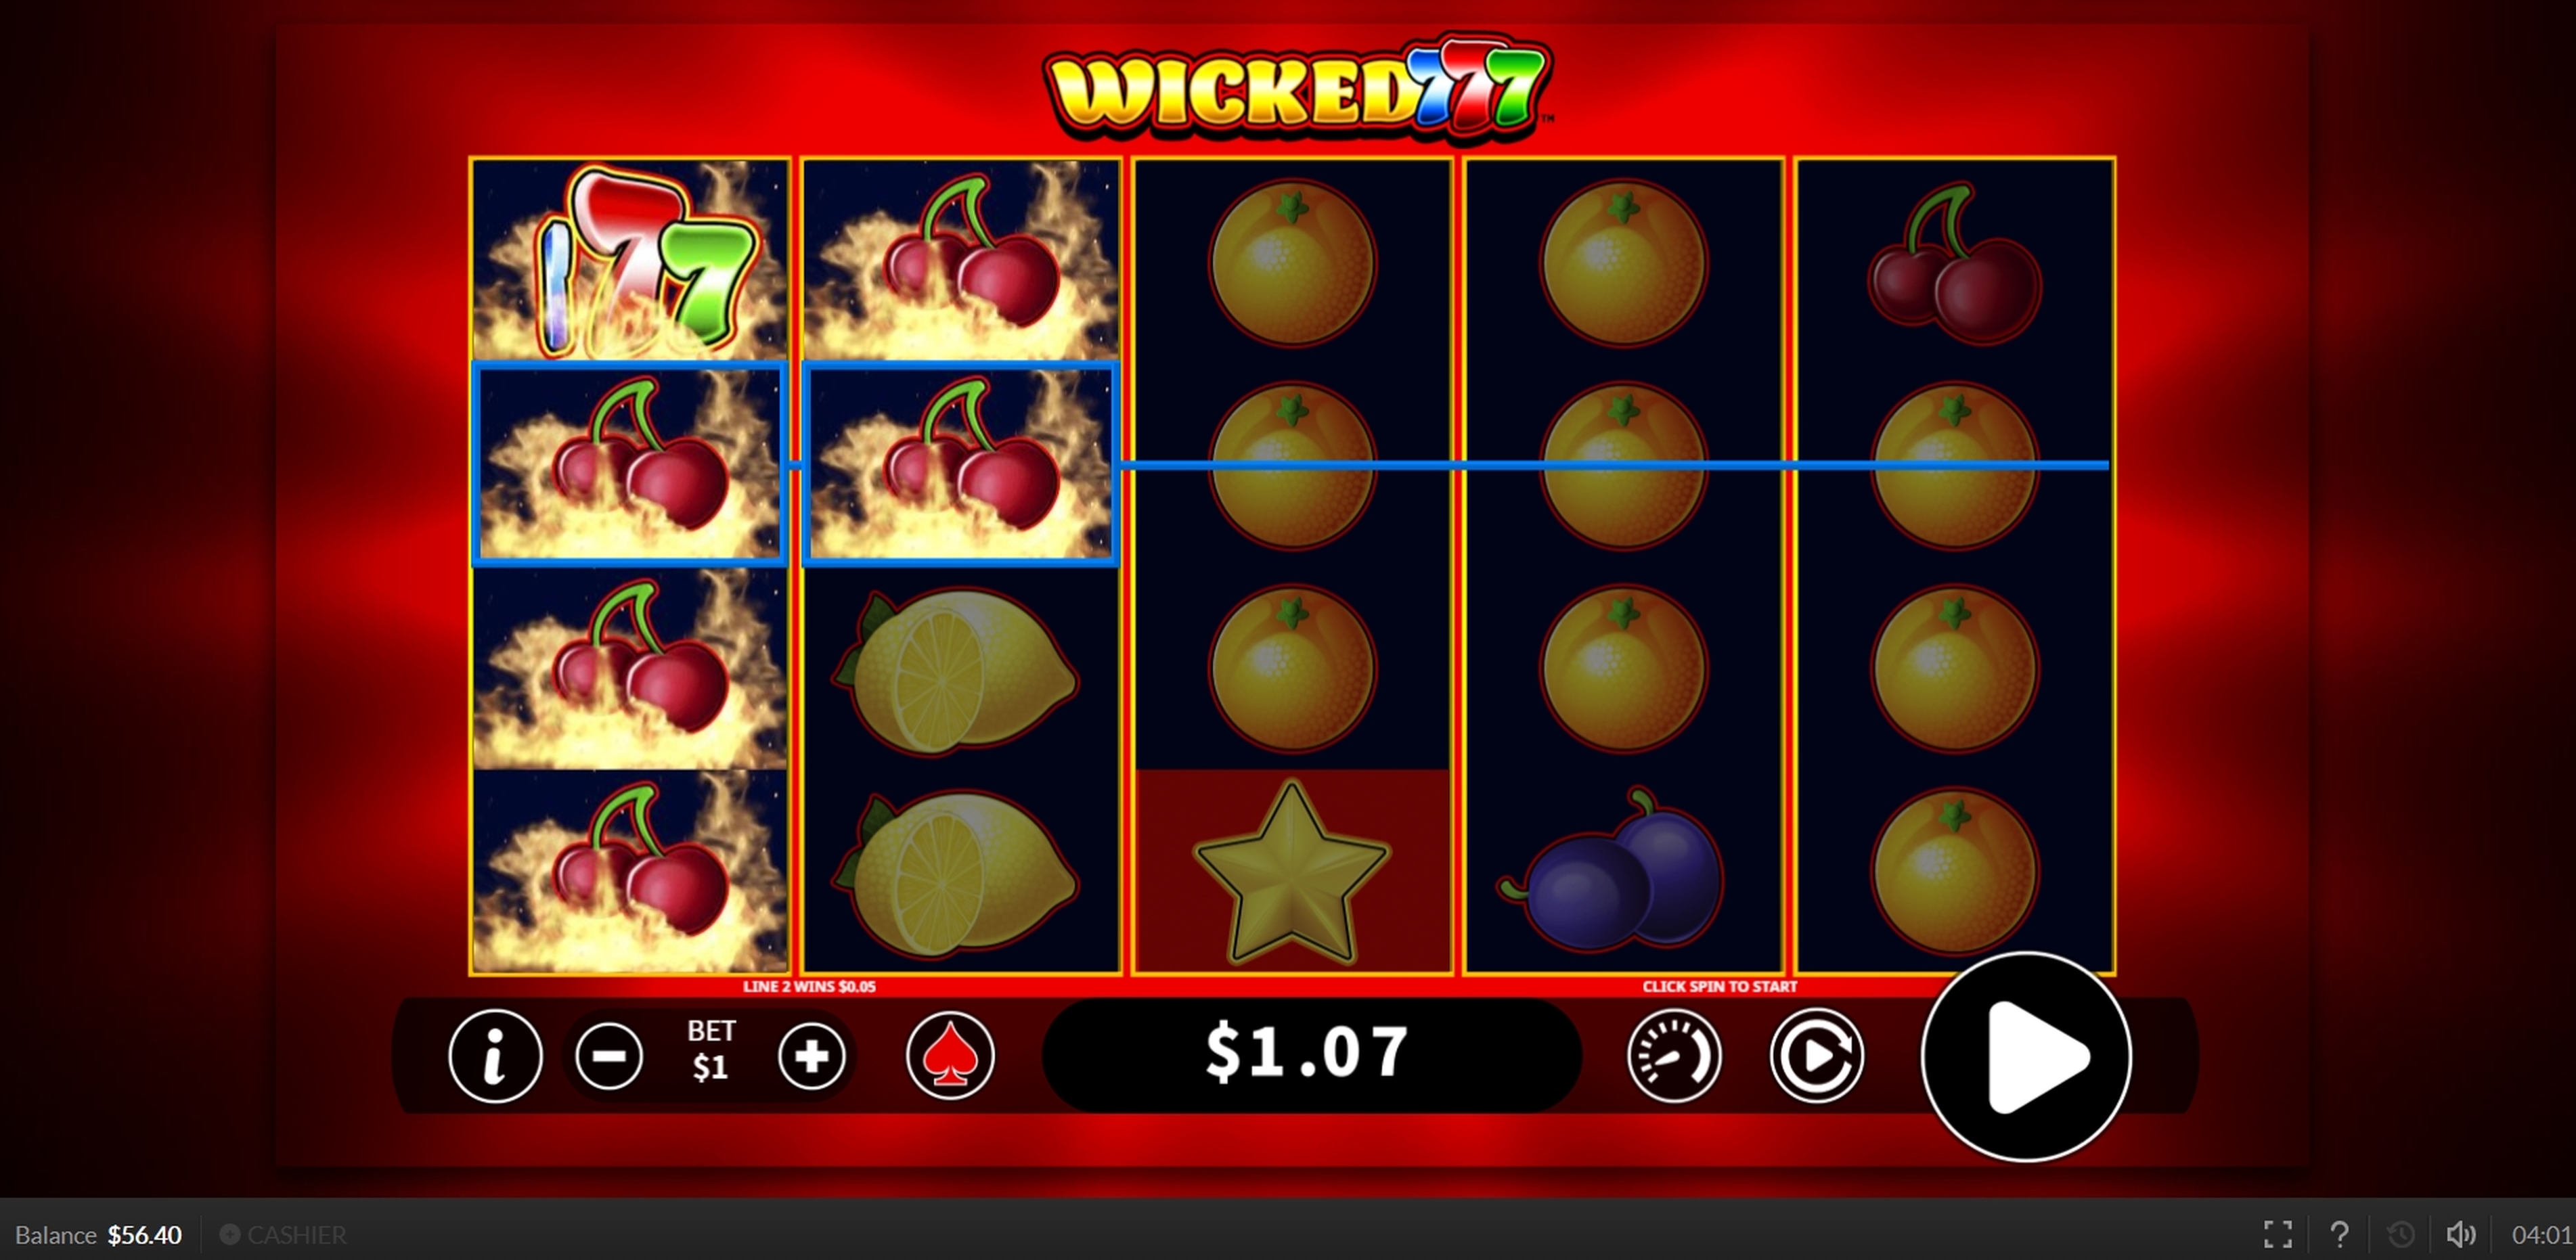 Win Money in Wicked 777 Free Slot Game by Skywind